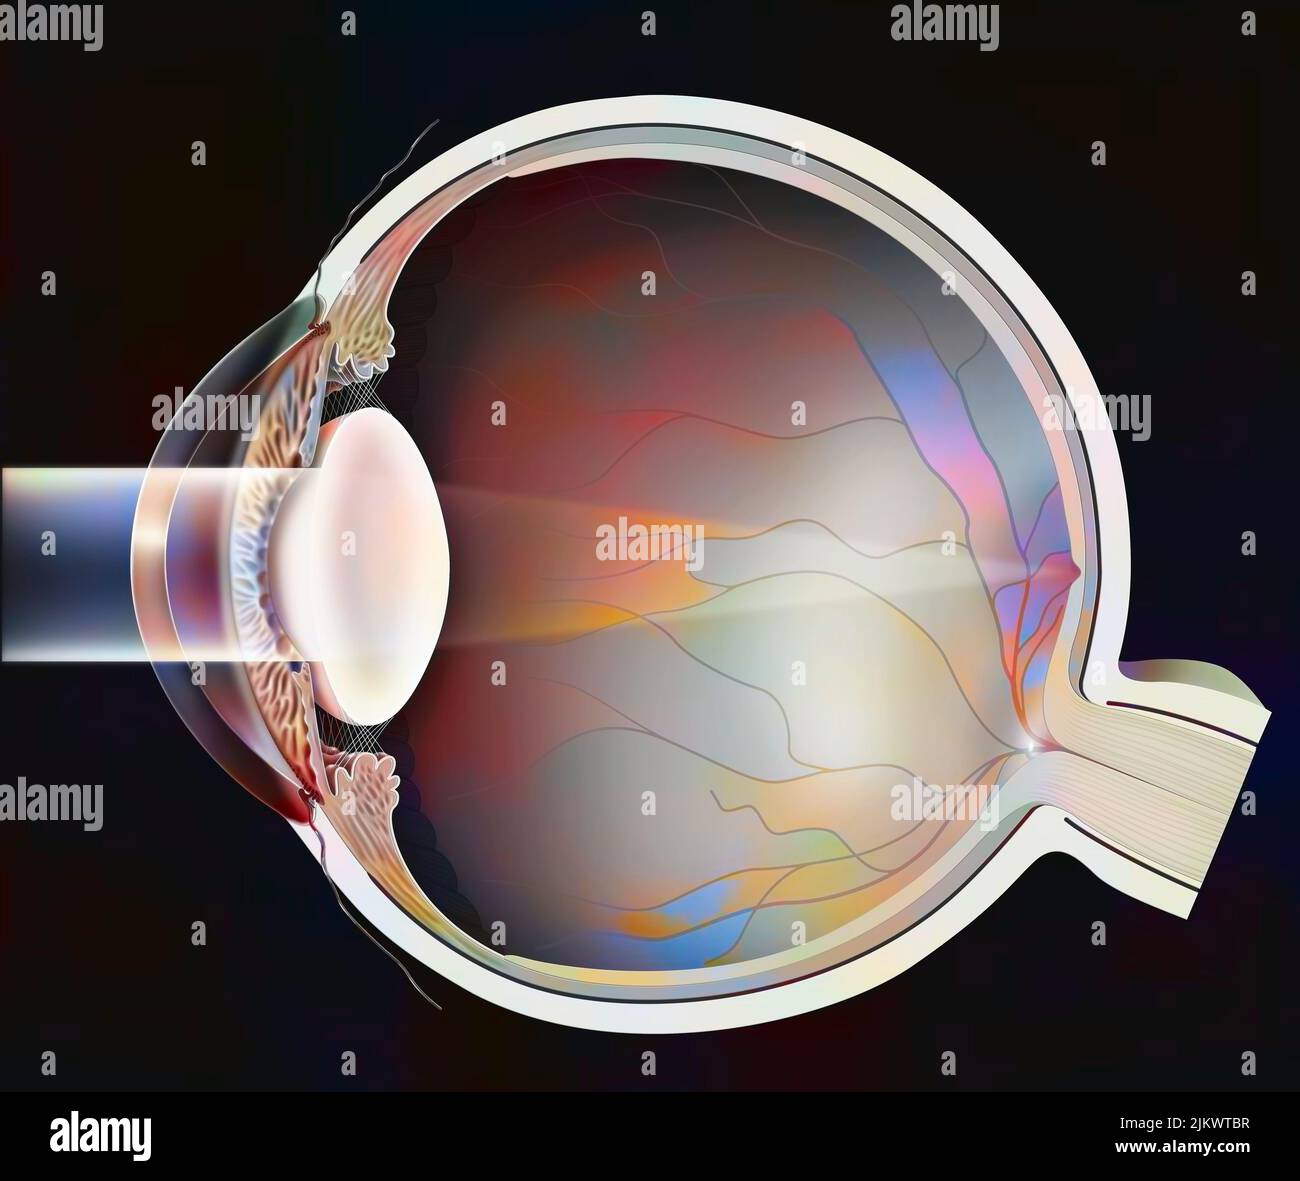 Eye: cataract with its cloudy, milky lens. Stock Photo